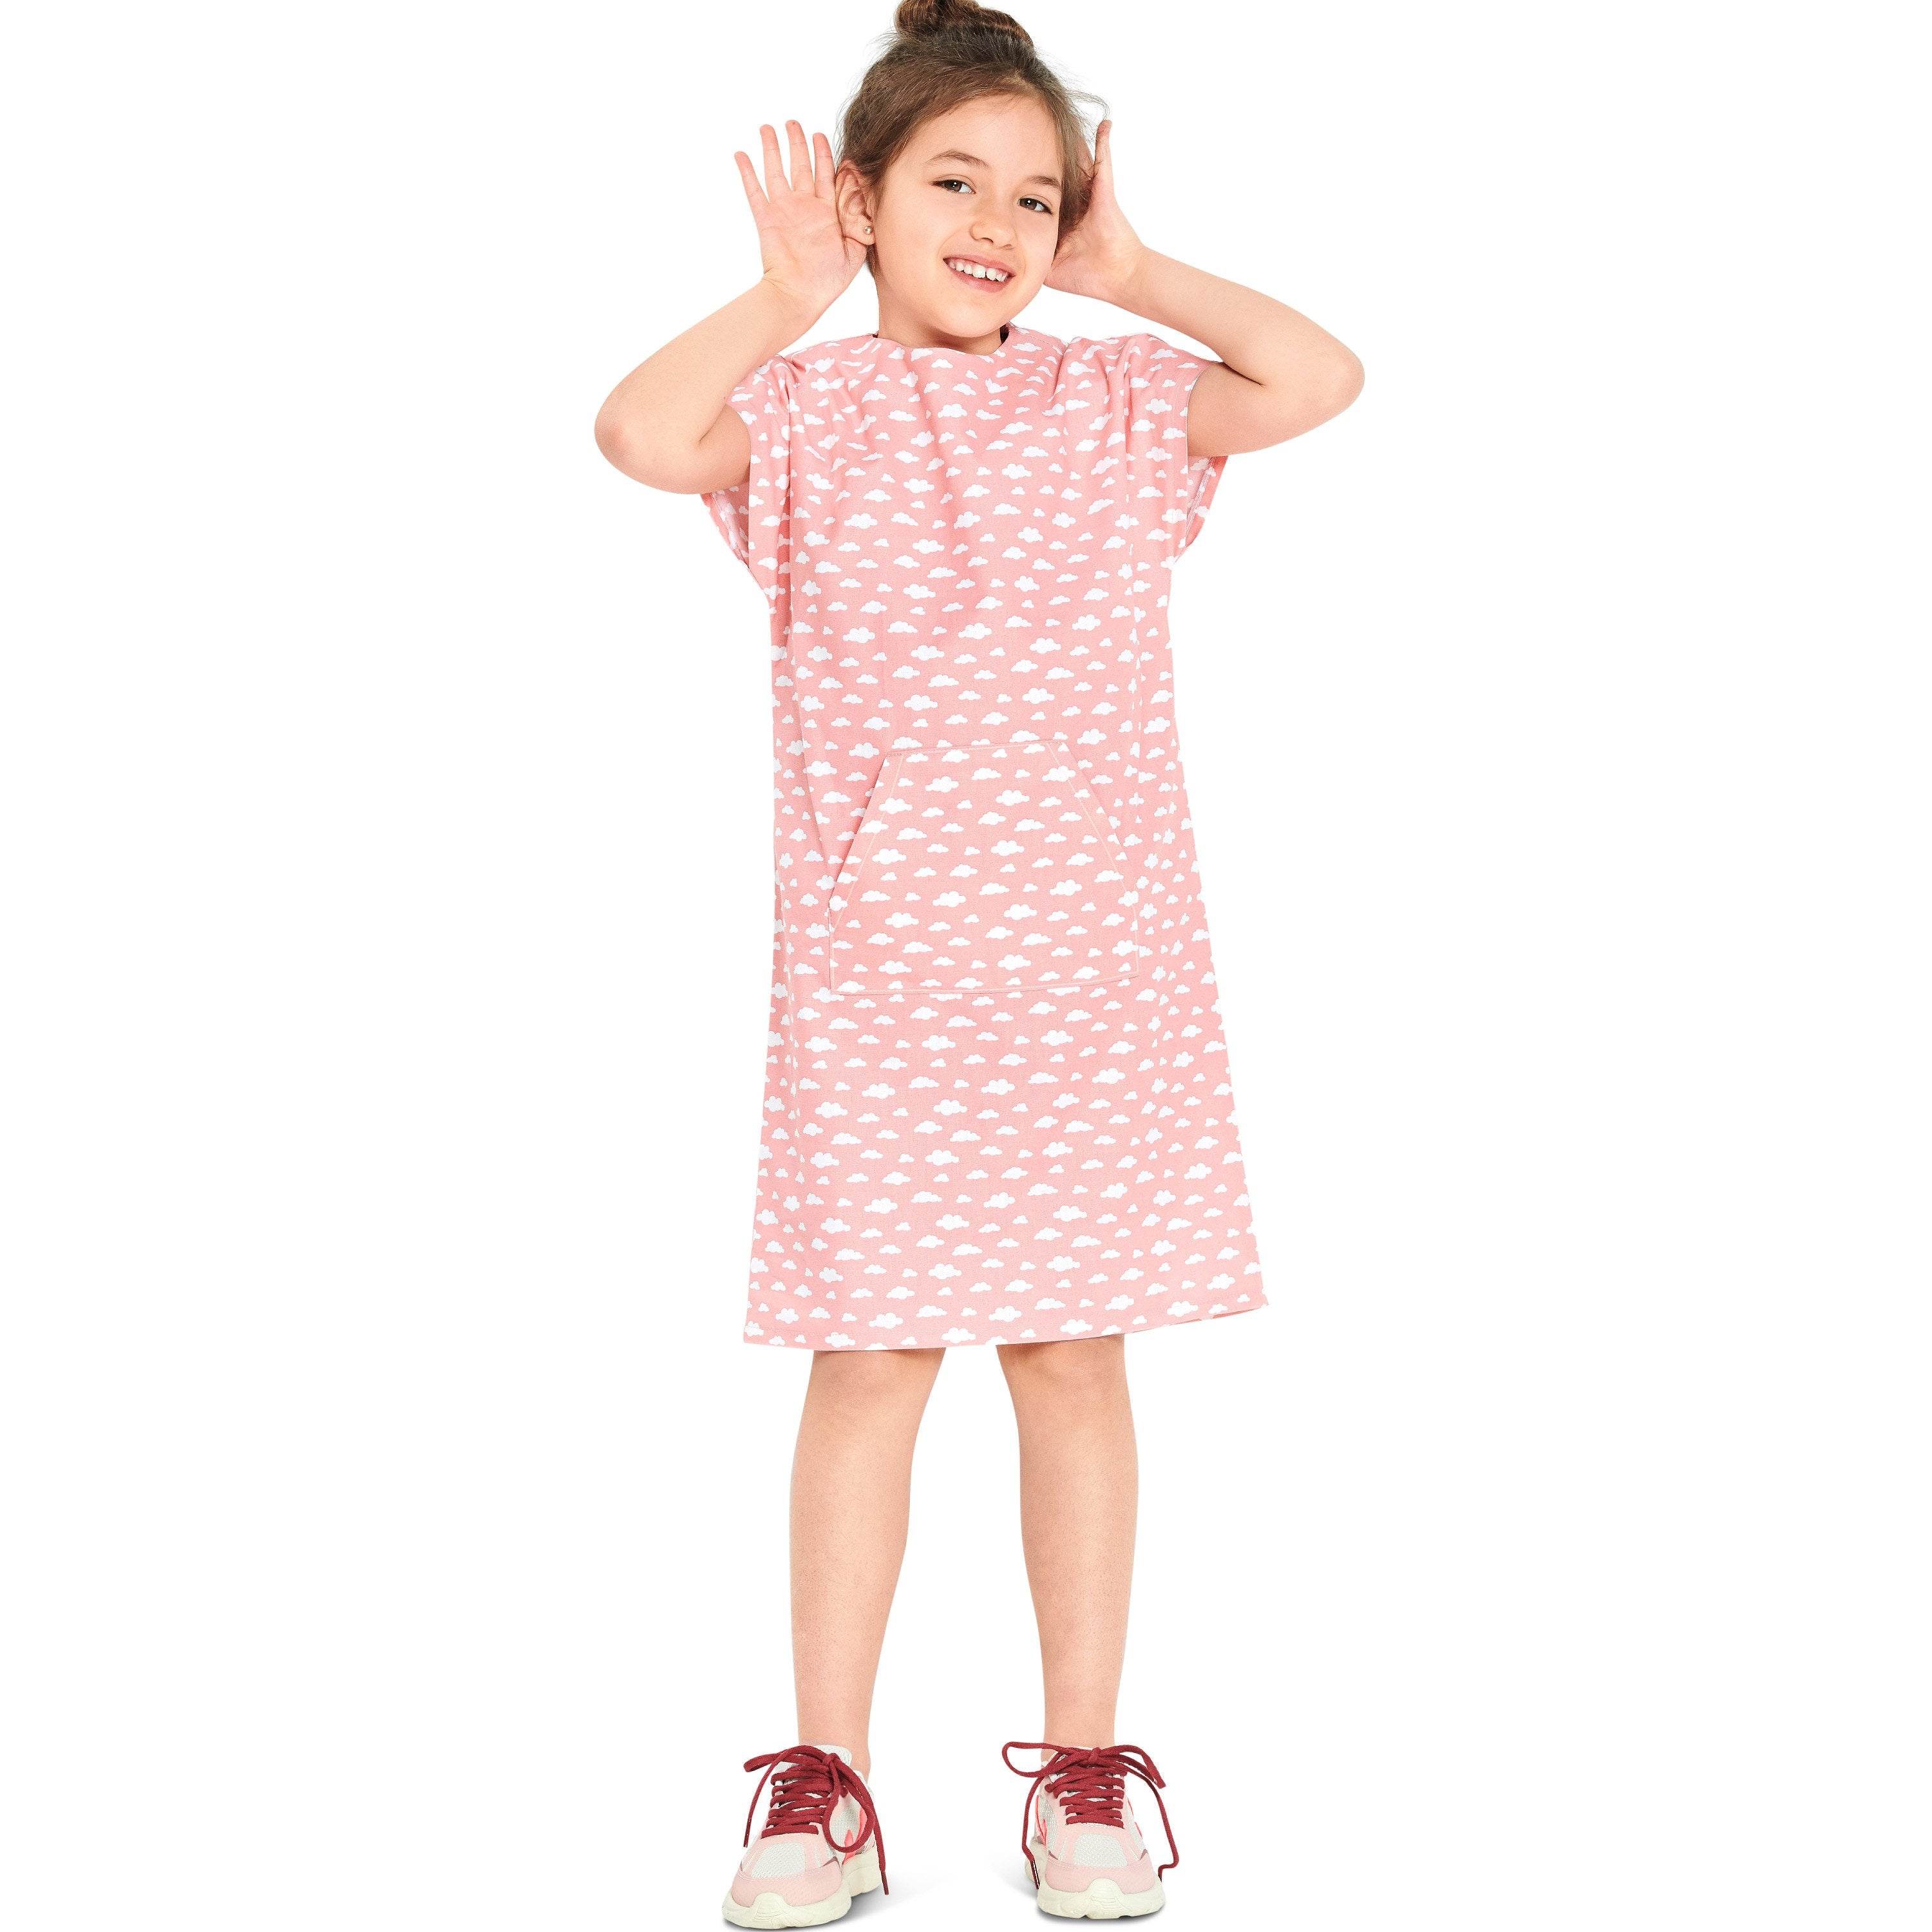 Burda Sewing Pattern 9282 Children's Top and Dress from Jaycotts Sewing Supplies